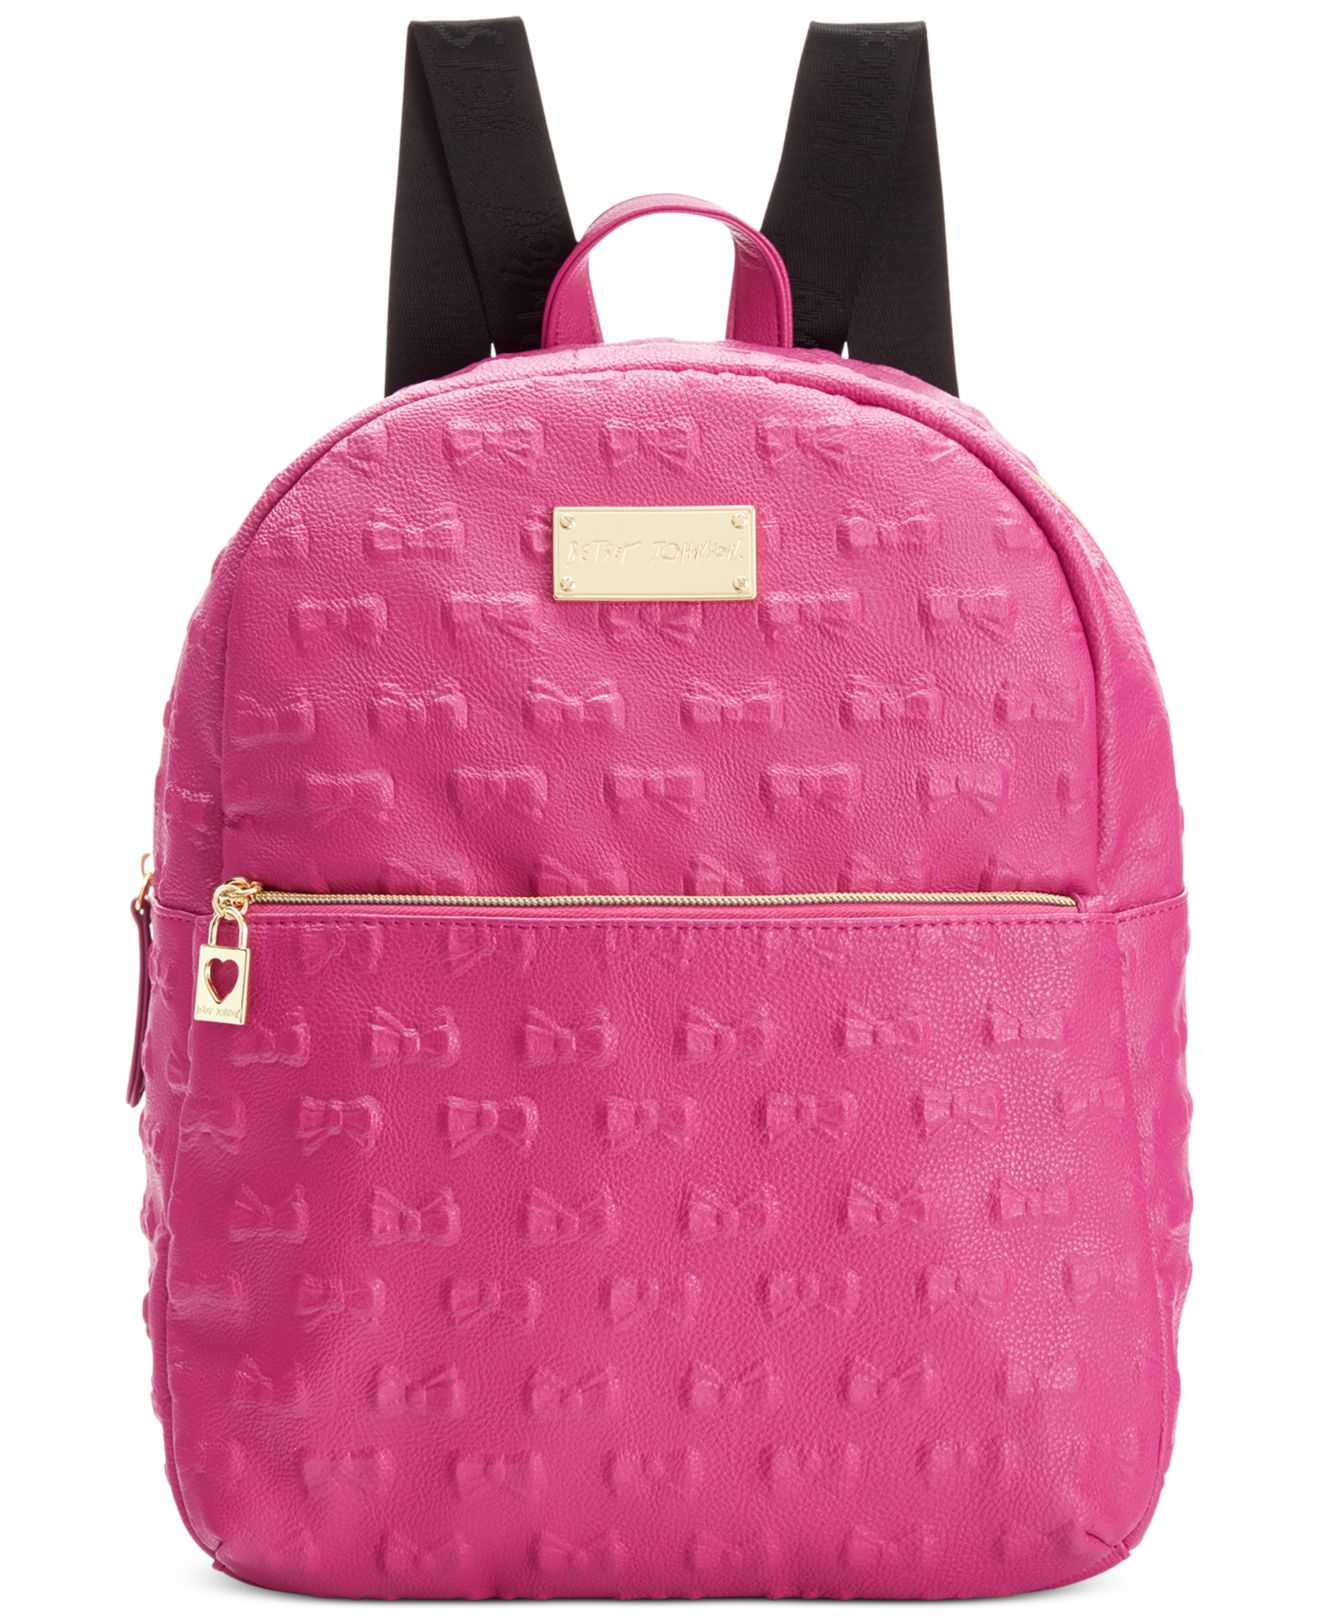 Lyst - Betsey Johnson Macy's Exclusive Debossed Bow Mini Backpack in Pink